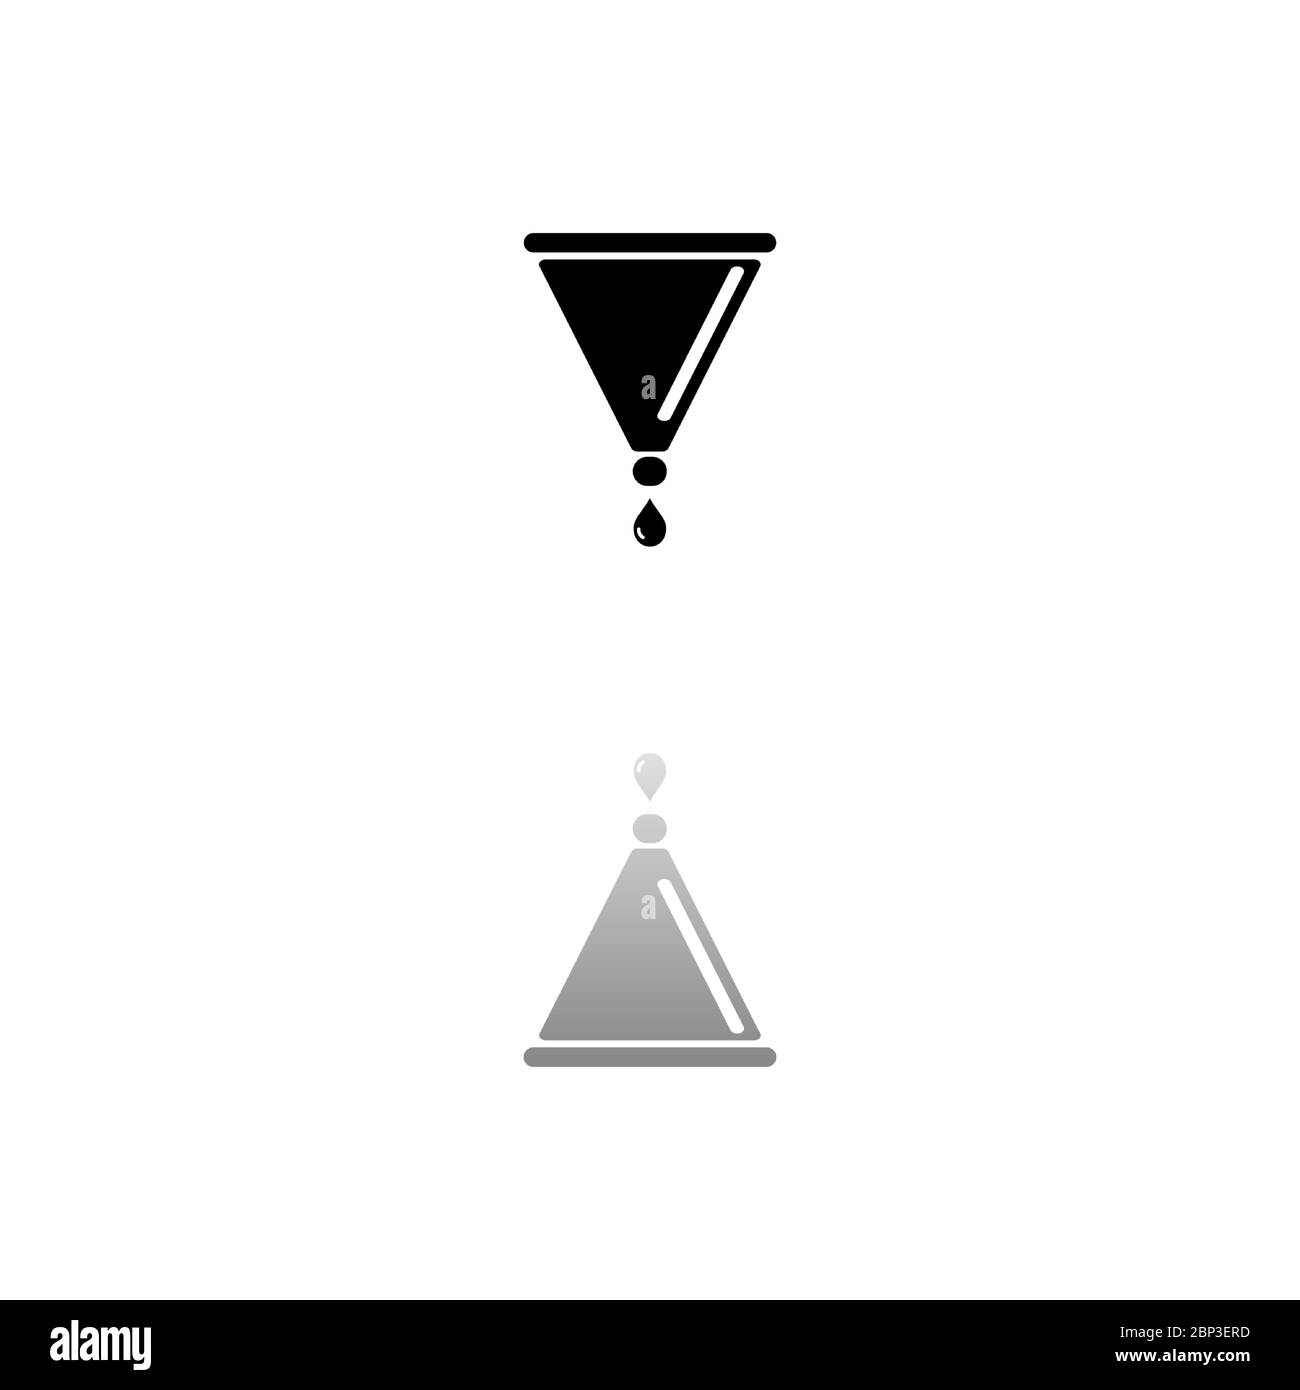 Filter funnel. Black symbol on white background. Simple illustration. Flat Vector Icon. Mirror Reflection Shadow. Can be used in logo, web, mobile and Stock Vector